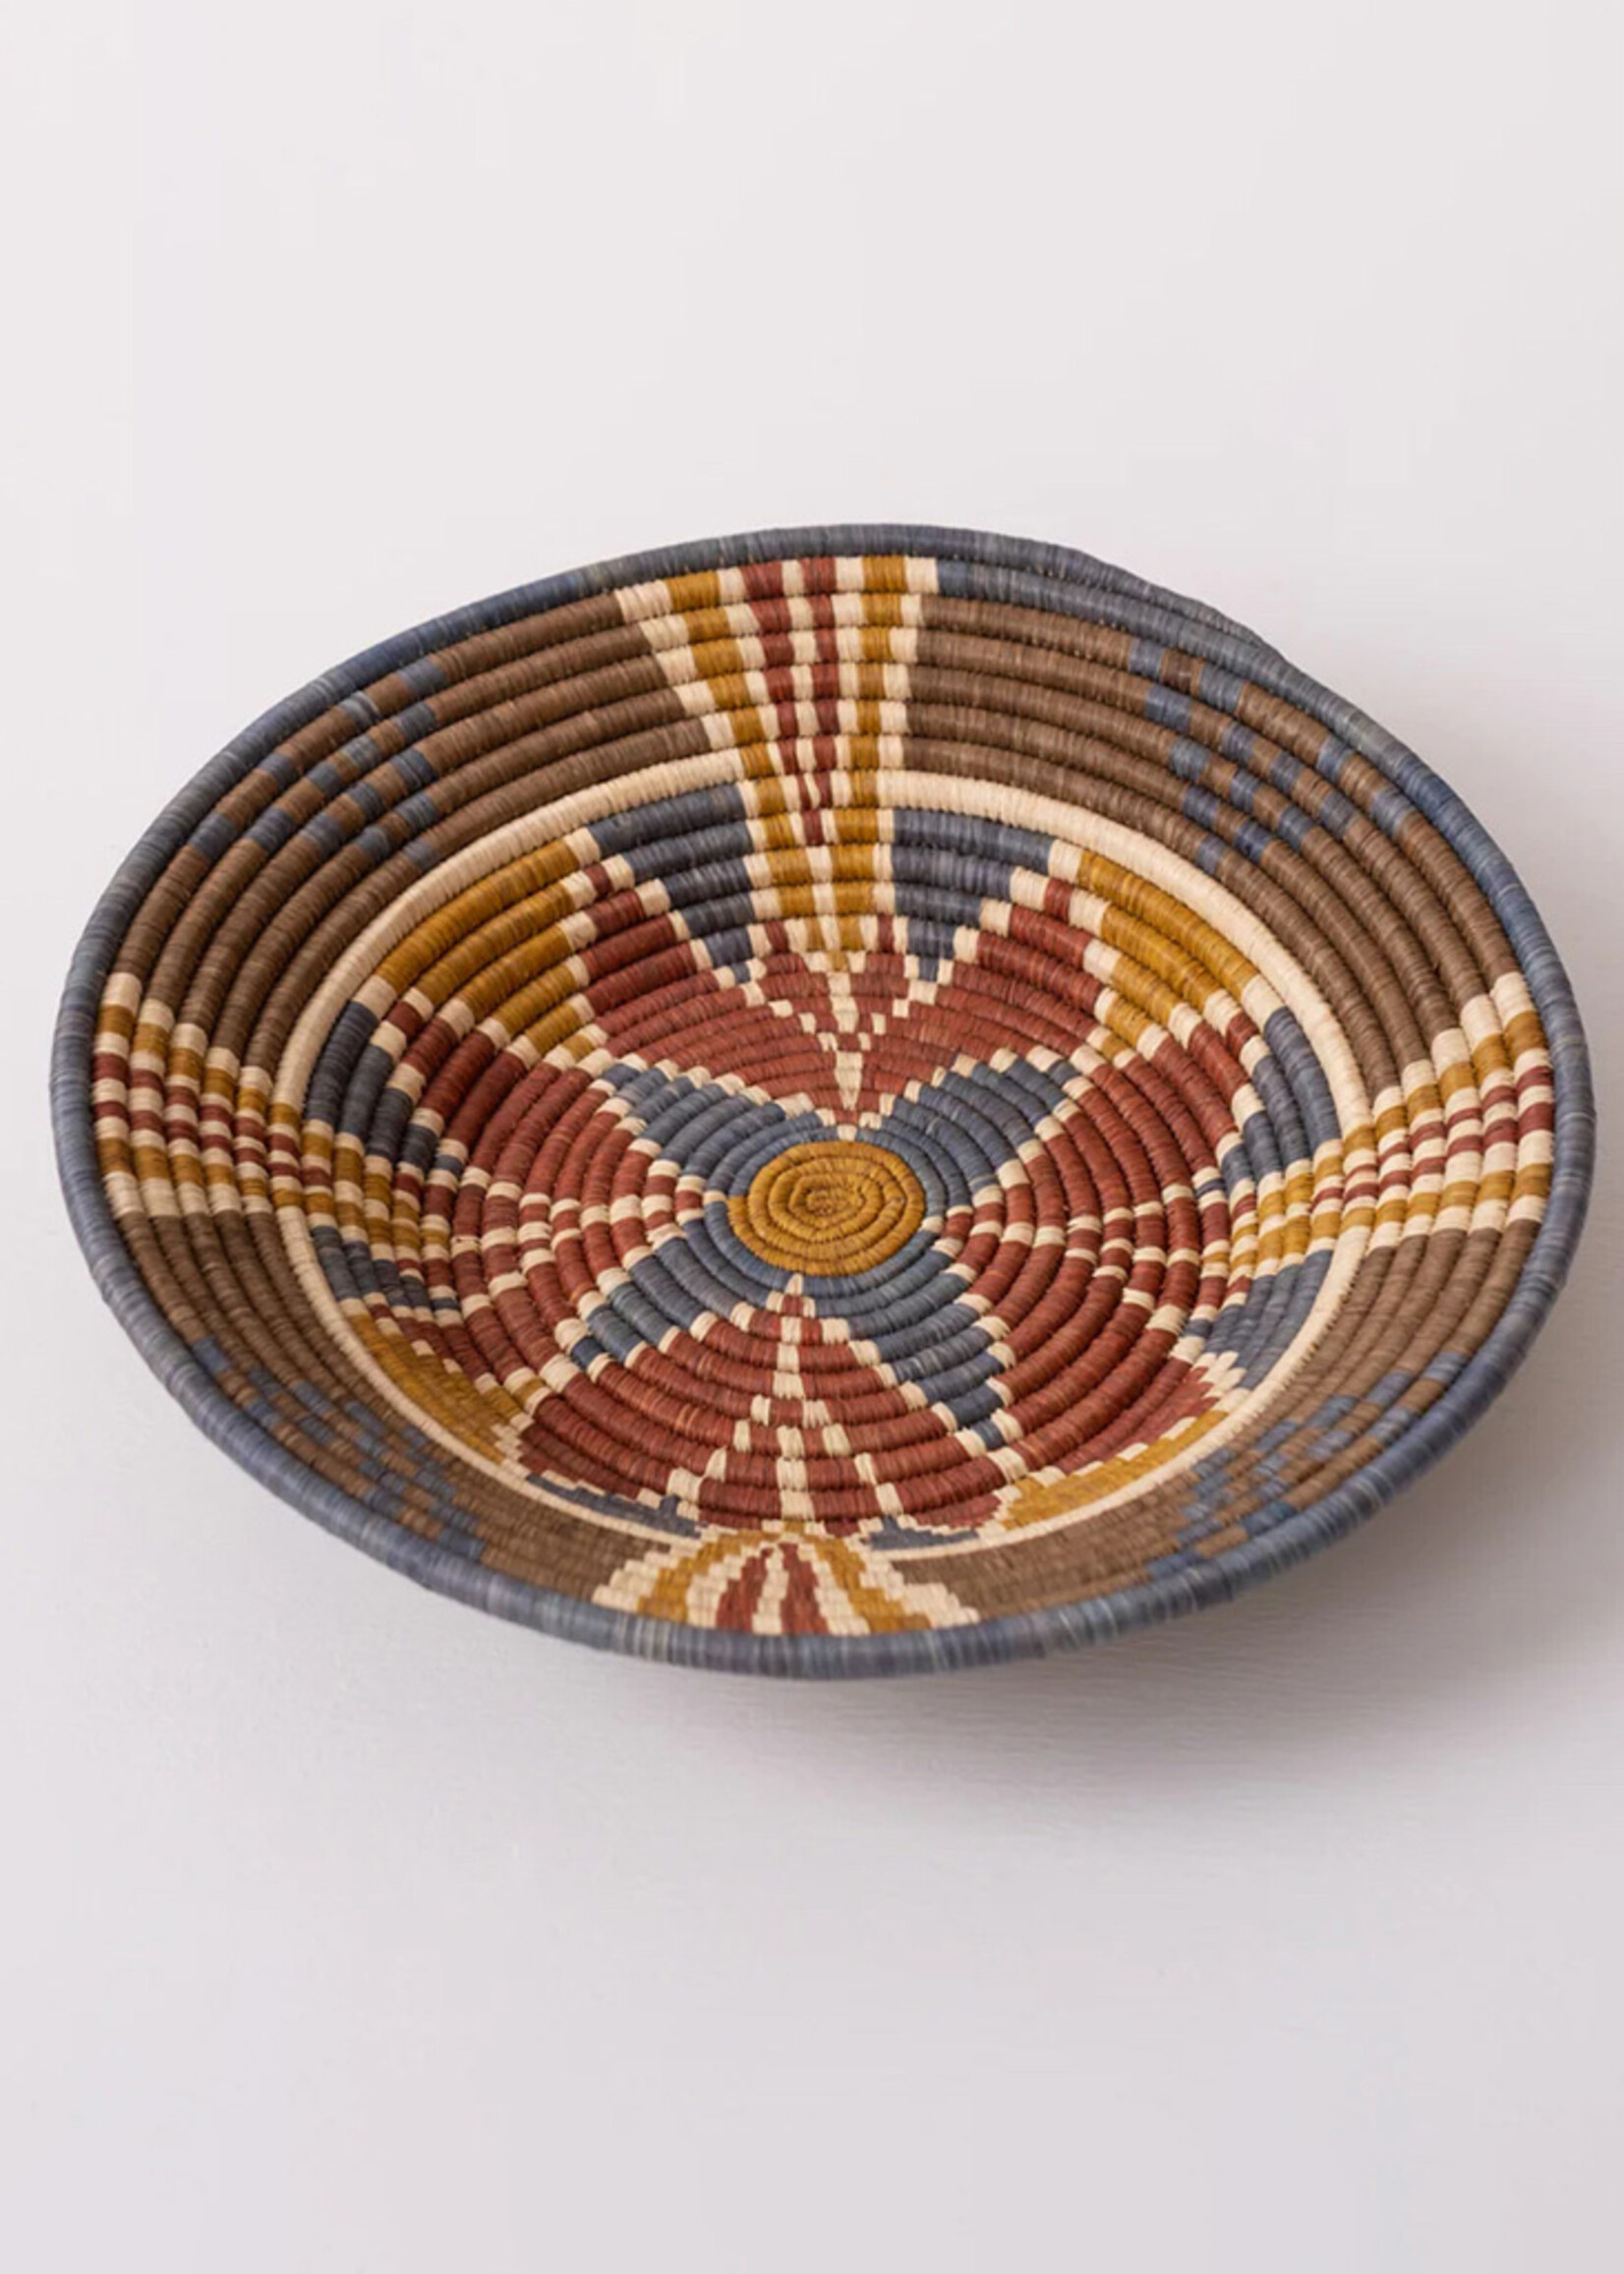 Maadili 13" Stained Glass Basket Bowl